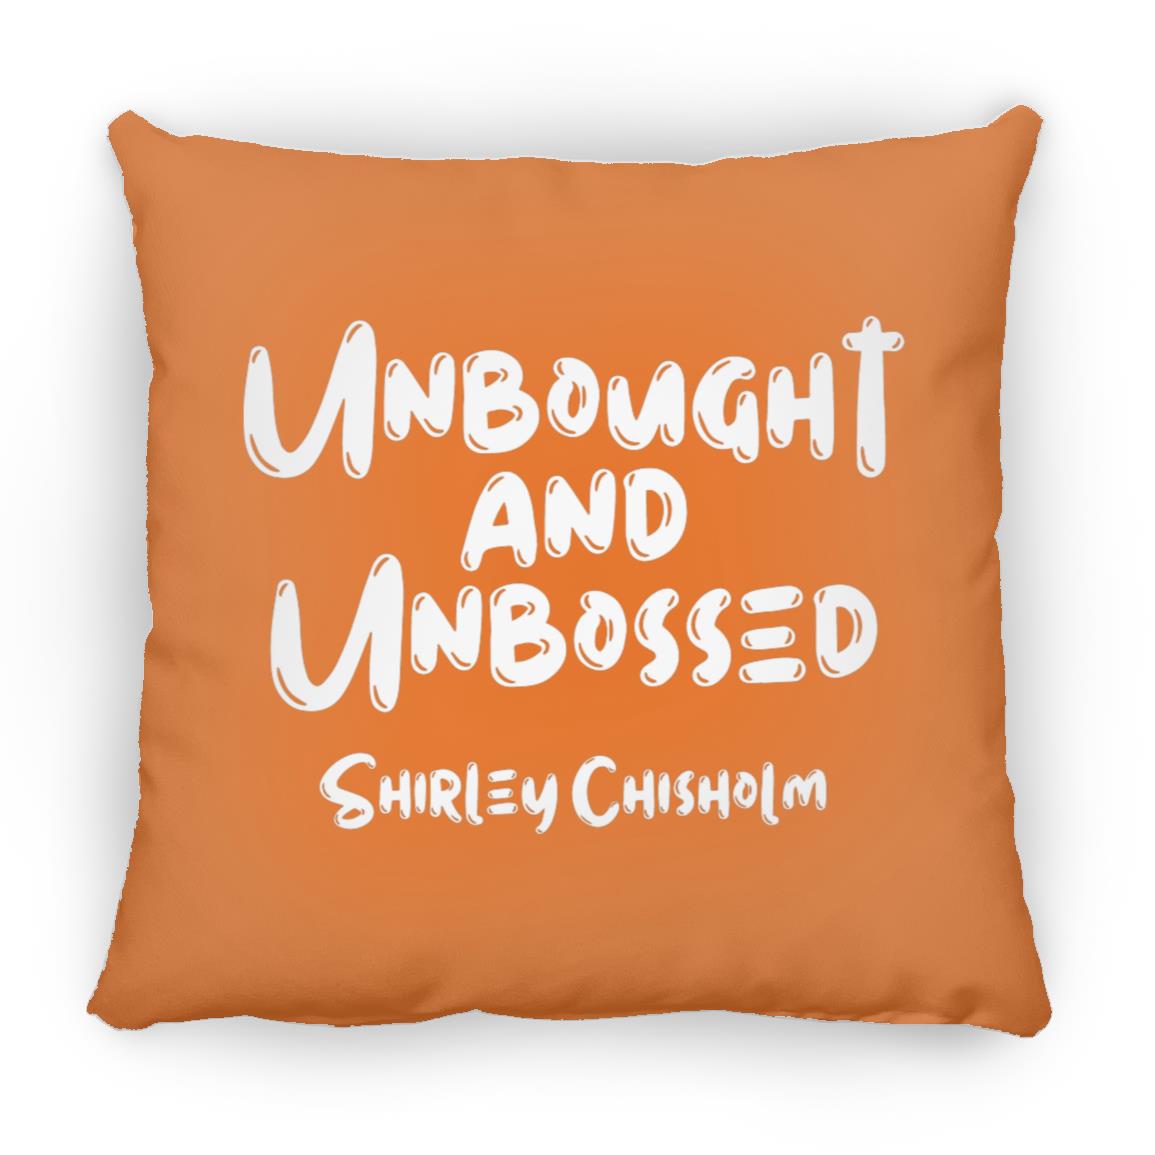 Shirley Chisholm Unbought And Unbossed Throw Pillow